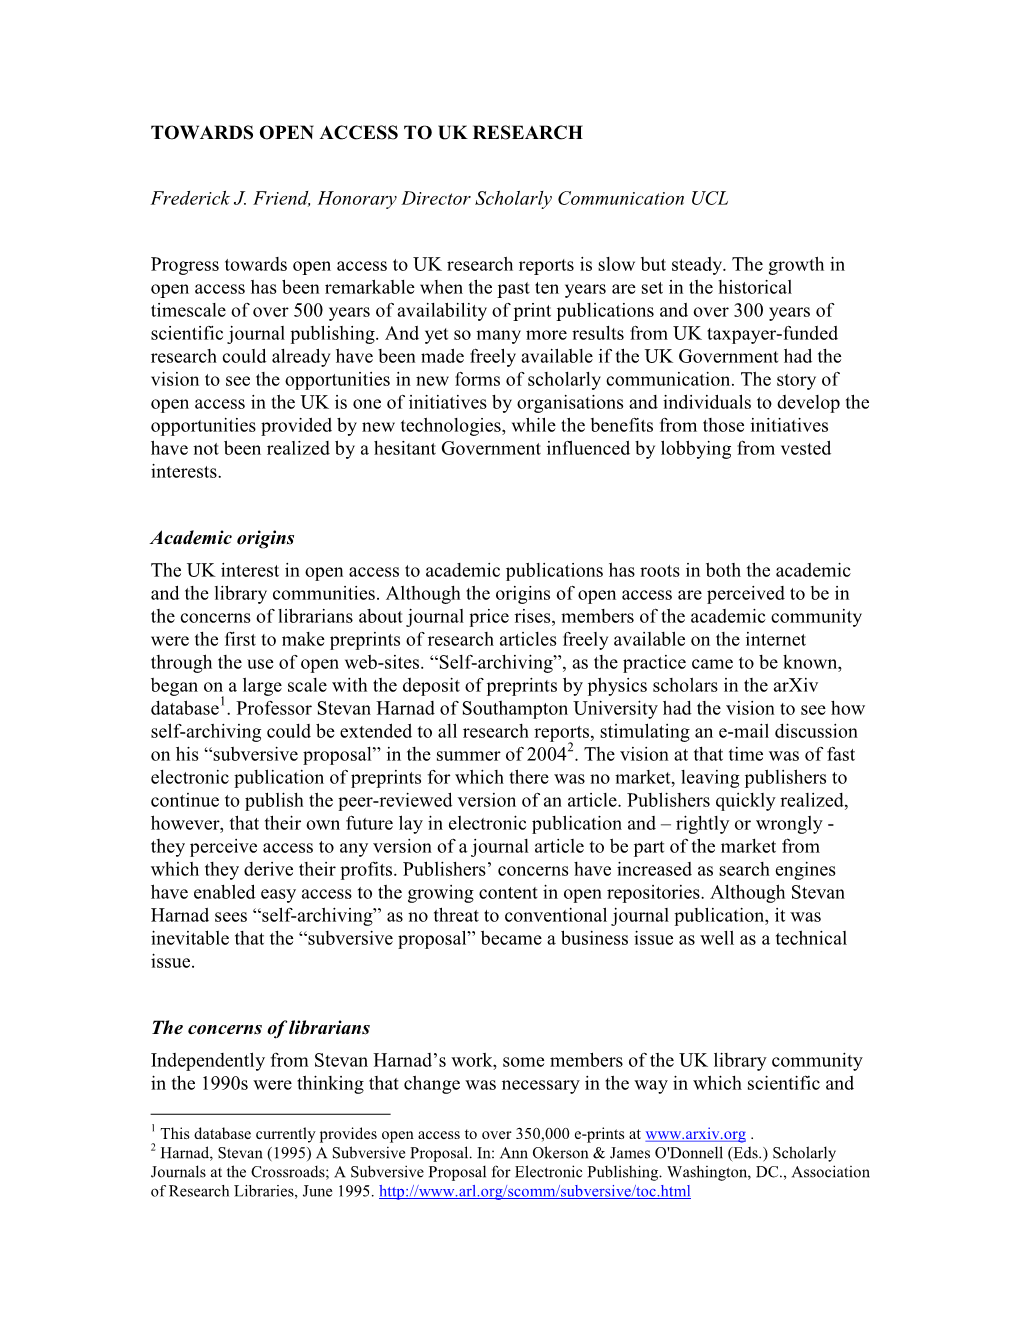 TOWARDS OPEN ACCESS to UK RESEARCH Frederick J. Friend